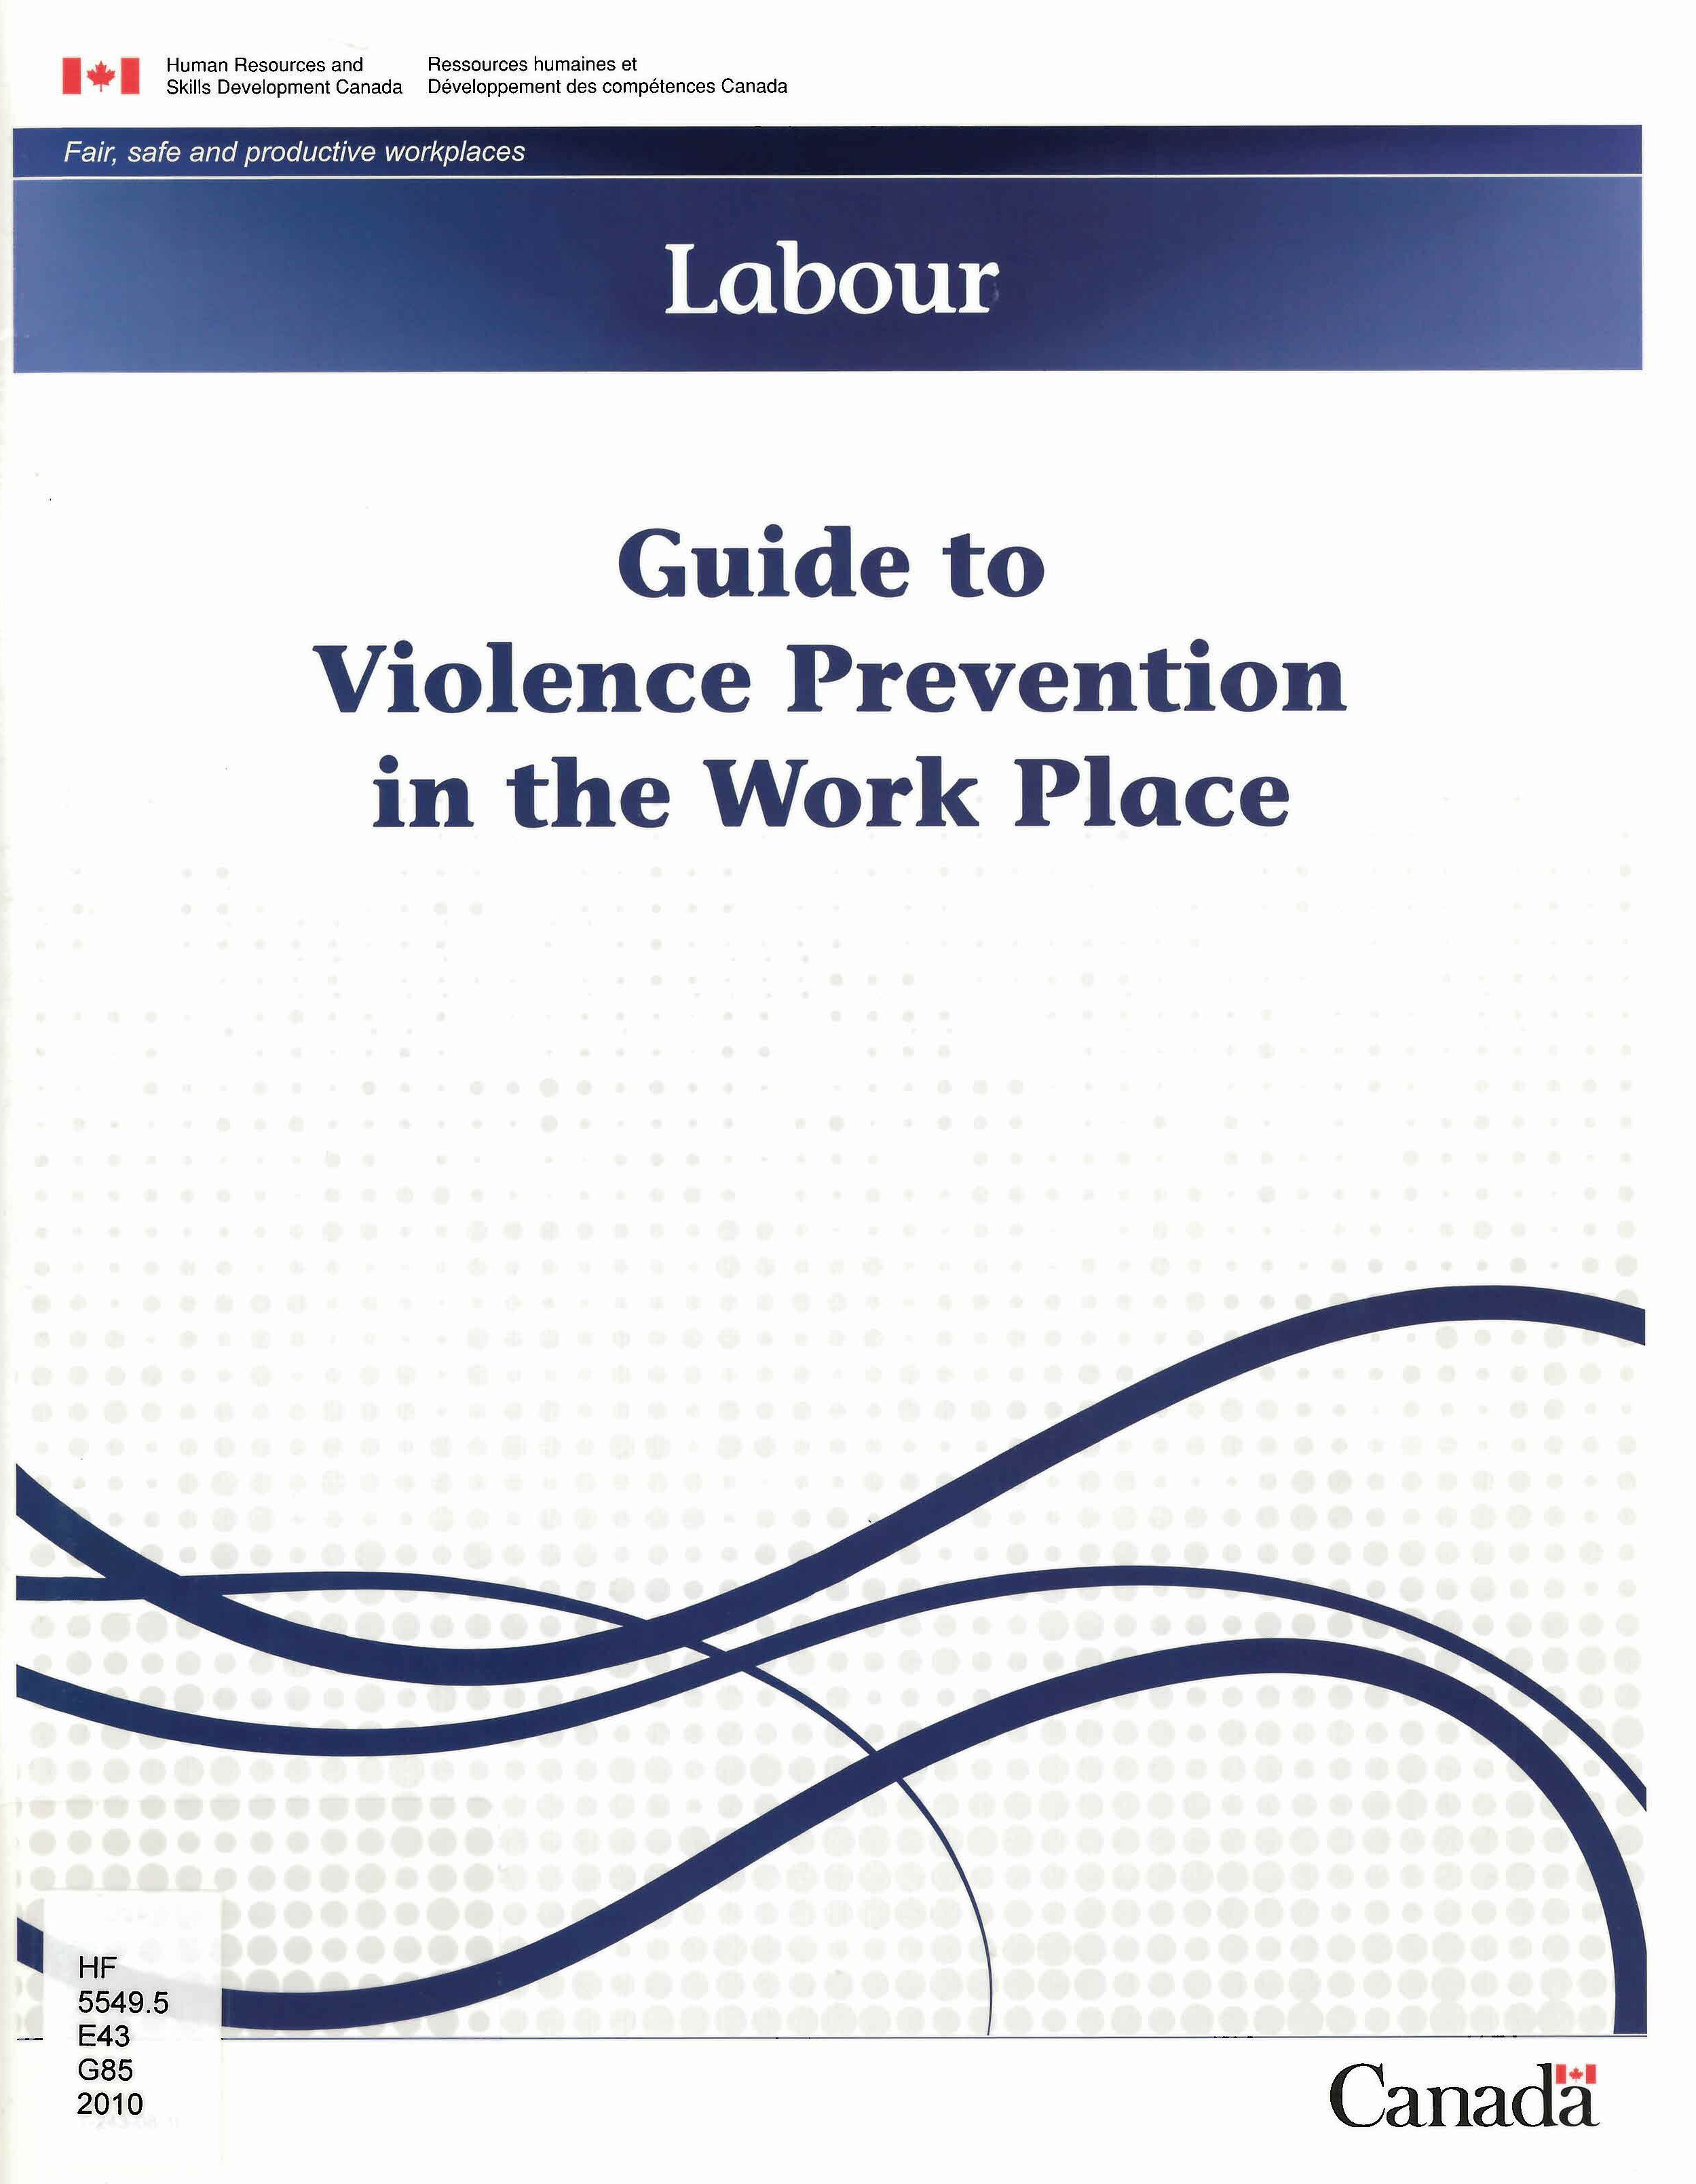 Guide to violence prevention in the work place.